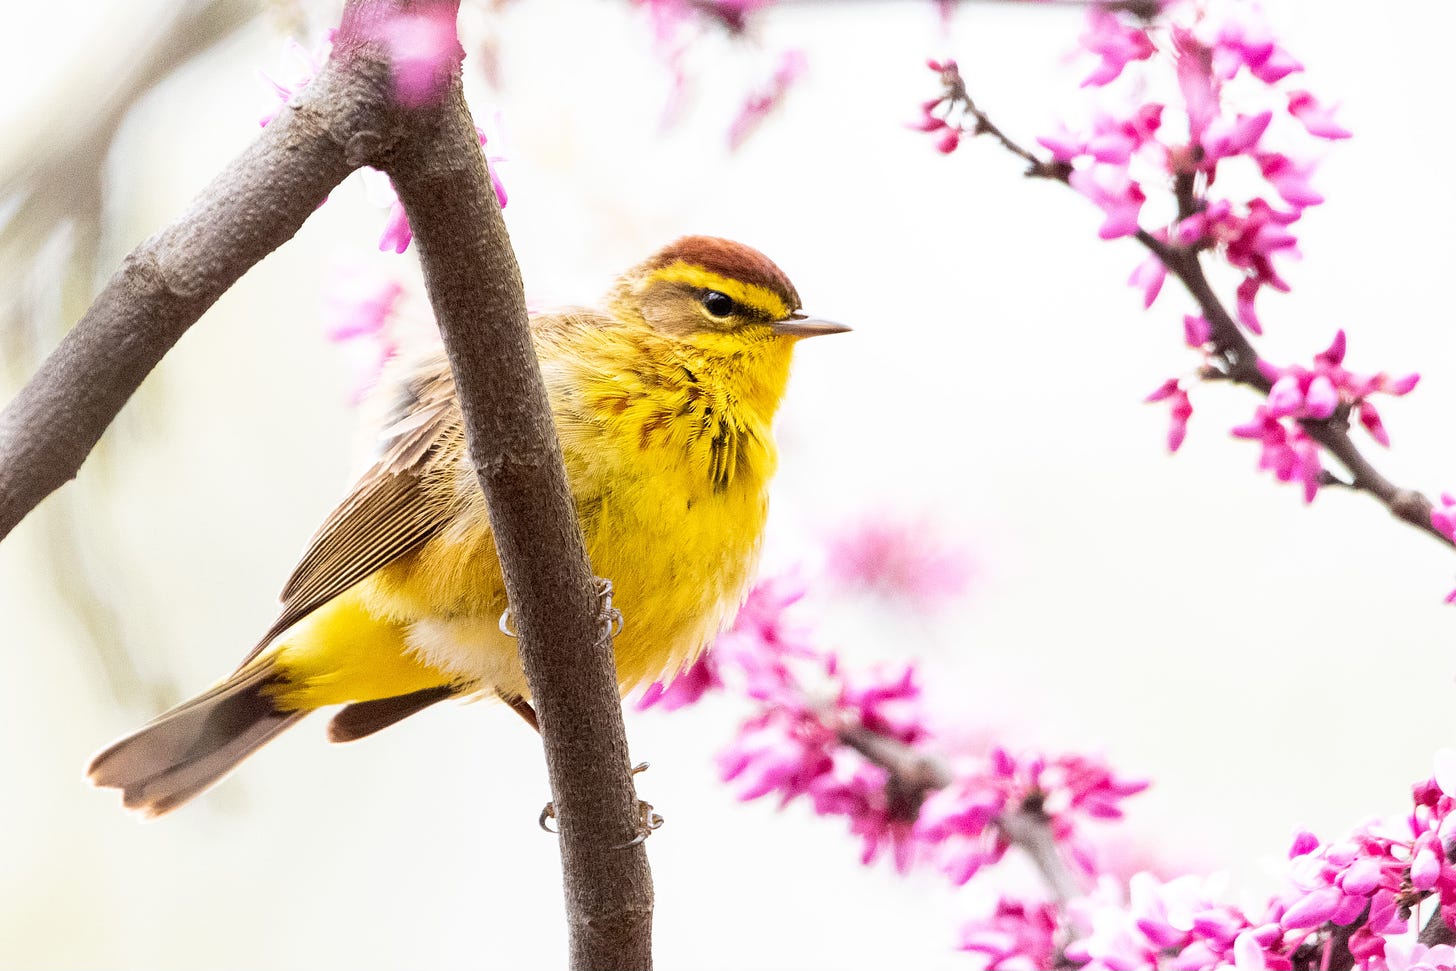 A yellow bird with a rufous cap and a dark brown eyeline is perched in a blooming redbud tree